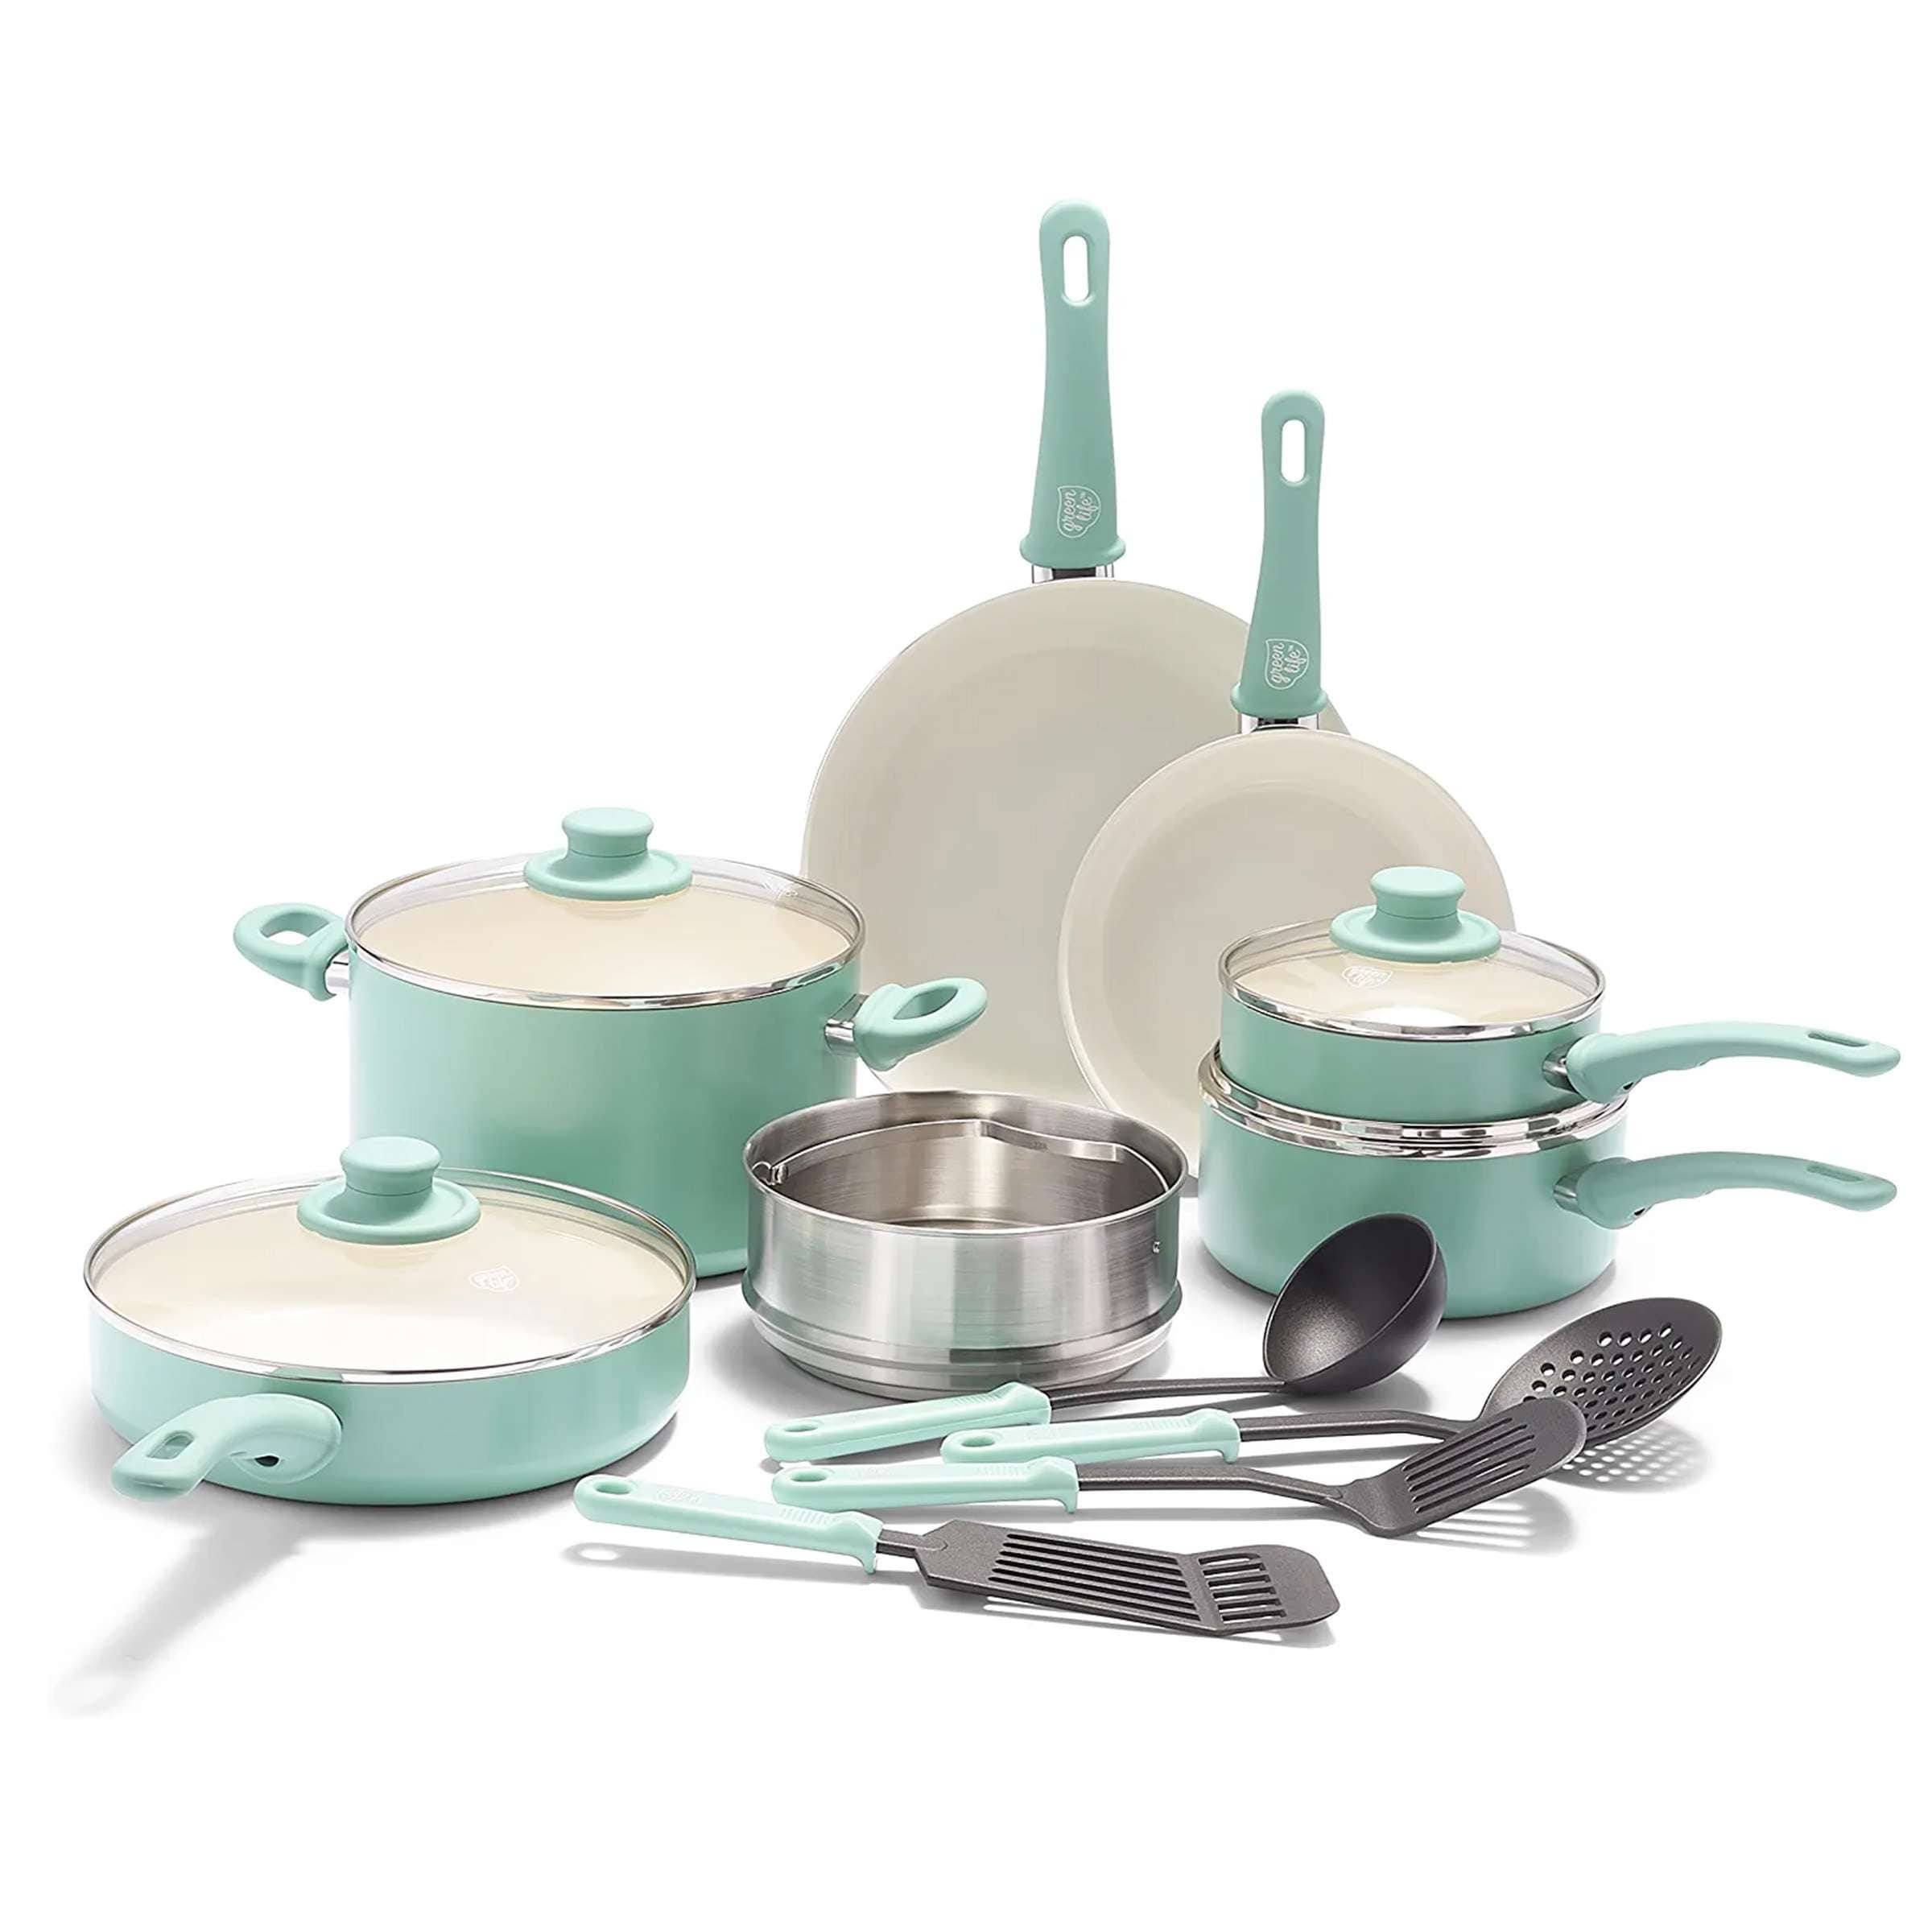 https://ak1.ostkcdn.com/images/products/is/images/direct/489f58c9b0345b12eadacb5ecf30c85d444980f0/GreenLife-Soft-Grip-15pc-Cookware-Set.jpg